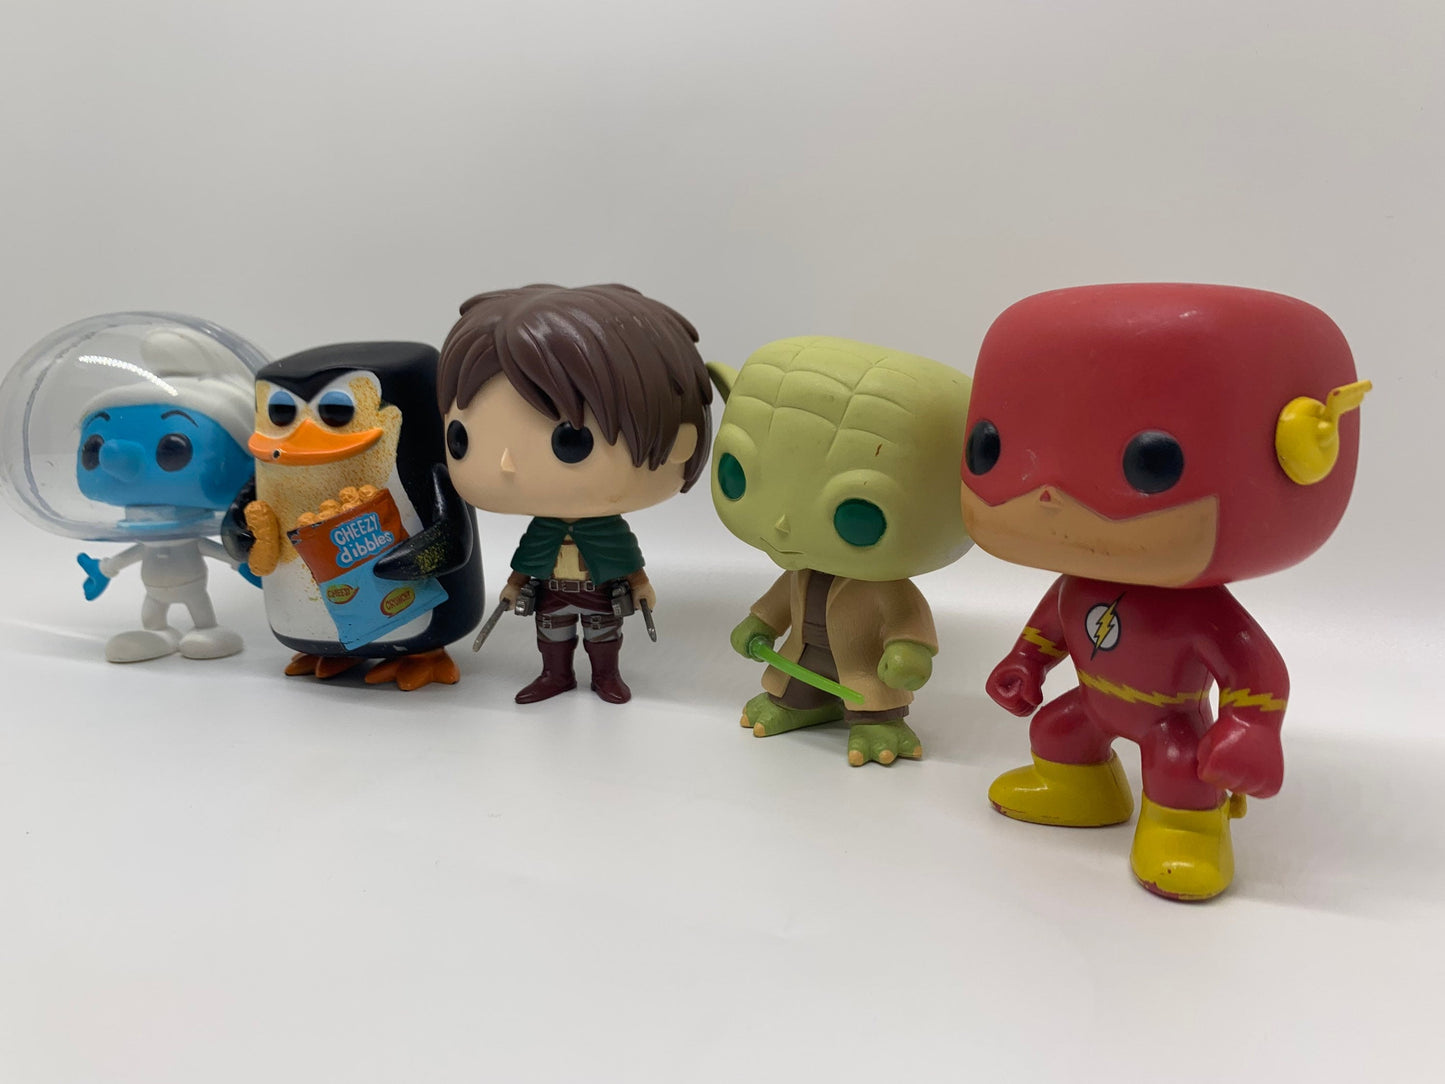 Funko Pop Television Perfect Birthday Gift Pop Culture Collectable Vinyl Figure Lot